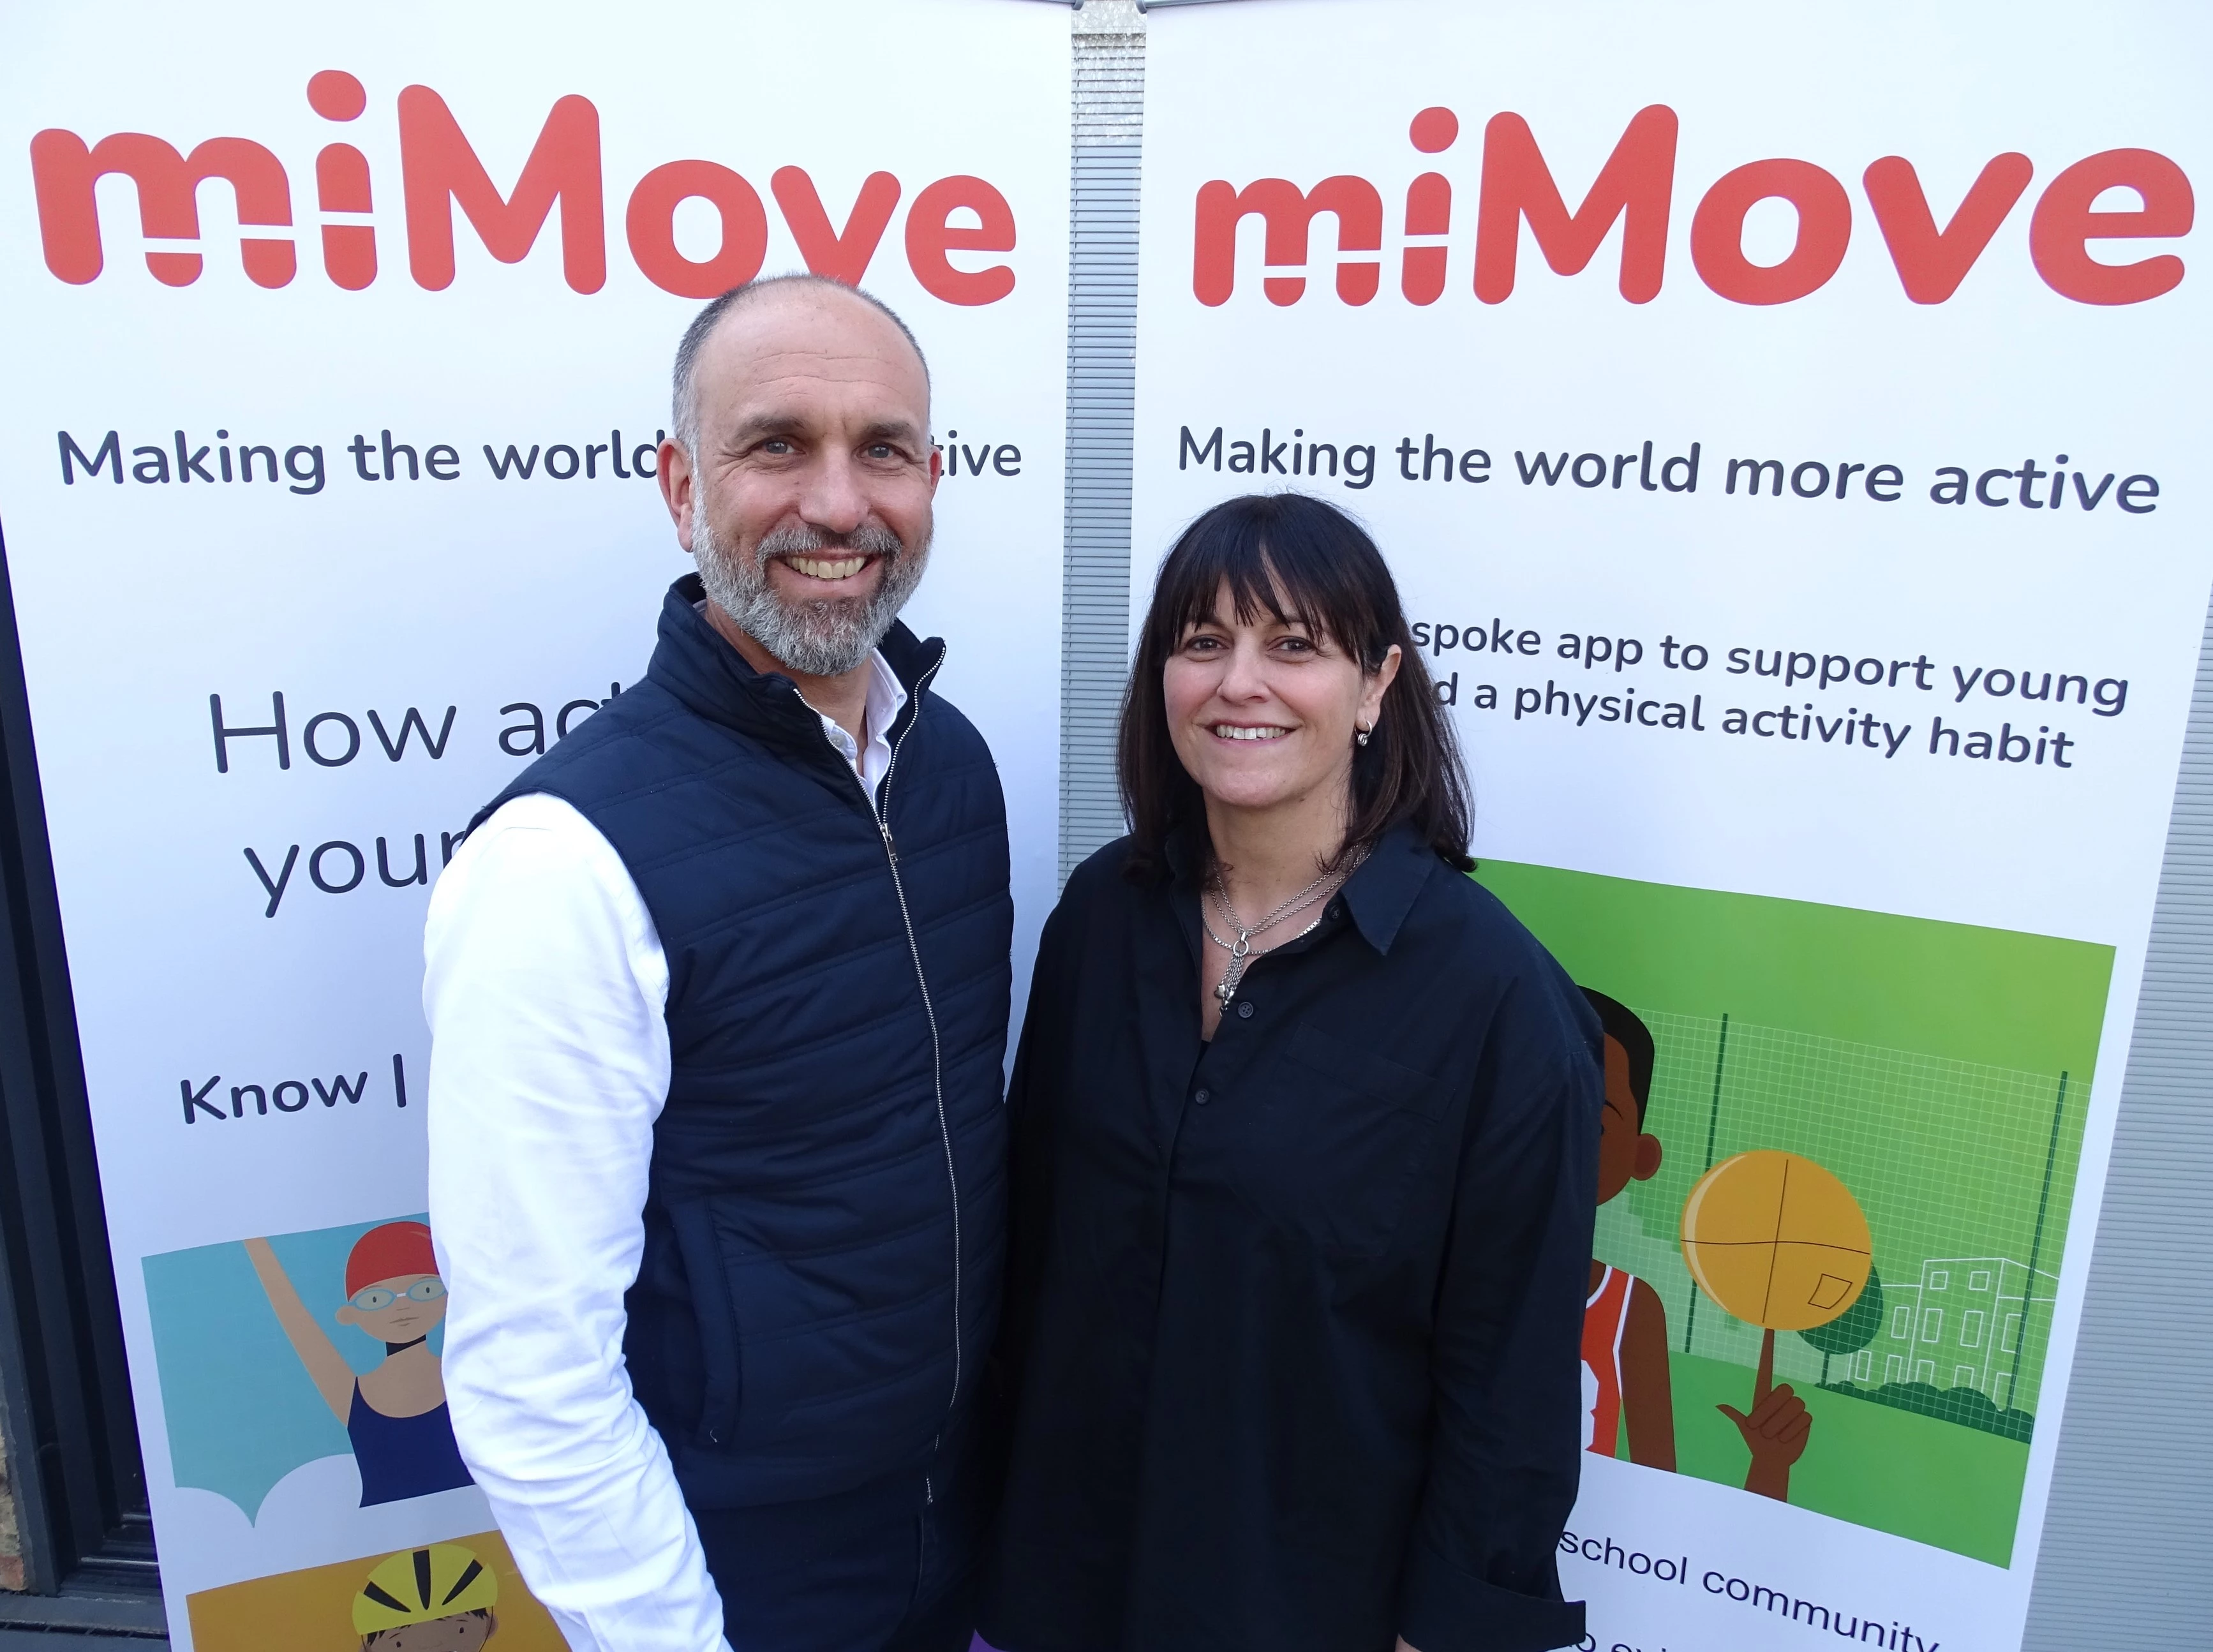 miMove founders Greg Dryer and Marcella Griso, finalists for the Tech Collaboration award at the West Midlands Tech Awards